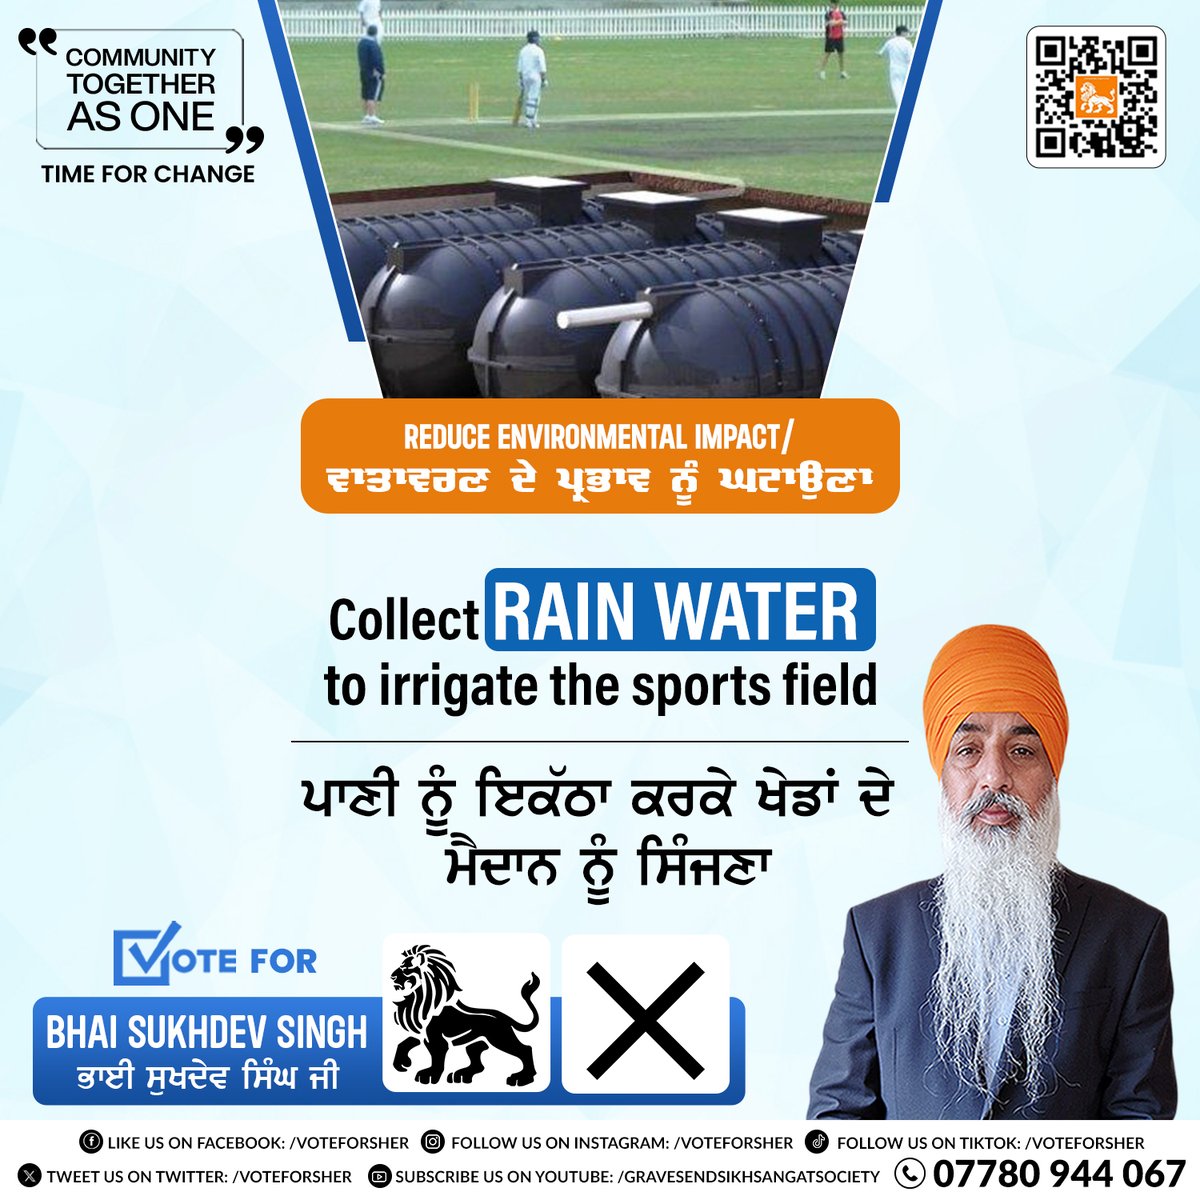 We will work on collecting the Rain water to irrigate the sports field so as to save and conserve precious water!
Vote for Bhai Sukhdev Singh, vote for Sher

#PreserveRainWater #CommunityTogetherAsOne #SaveEnvironment #SportsField #BhaiSukhdevSingh #UKElections  #CollectRainWater